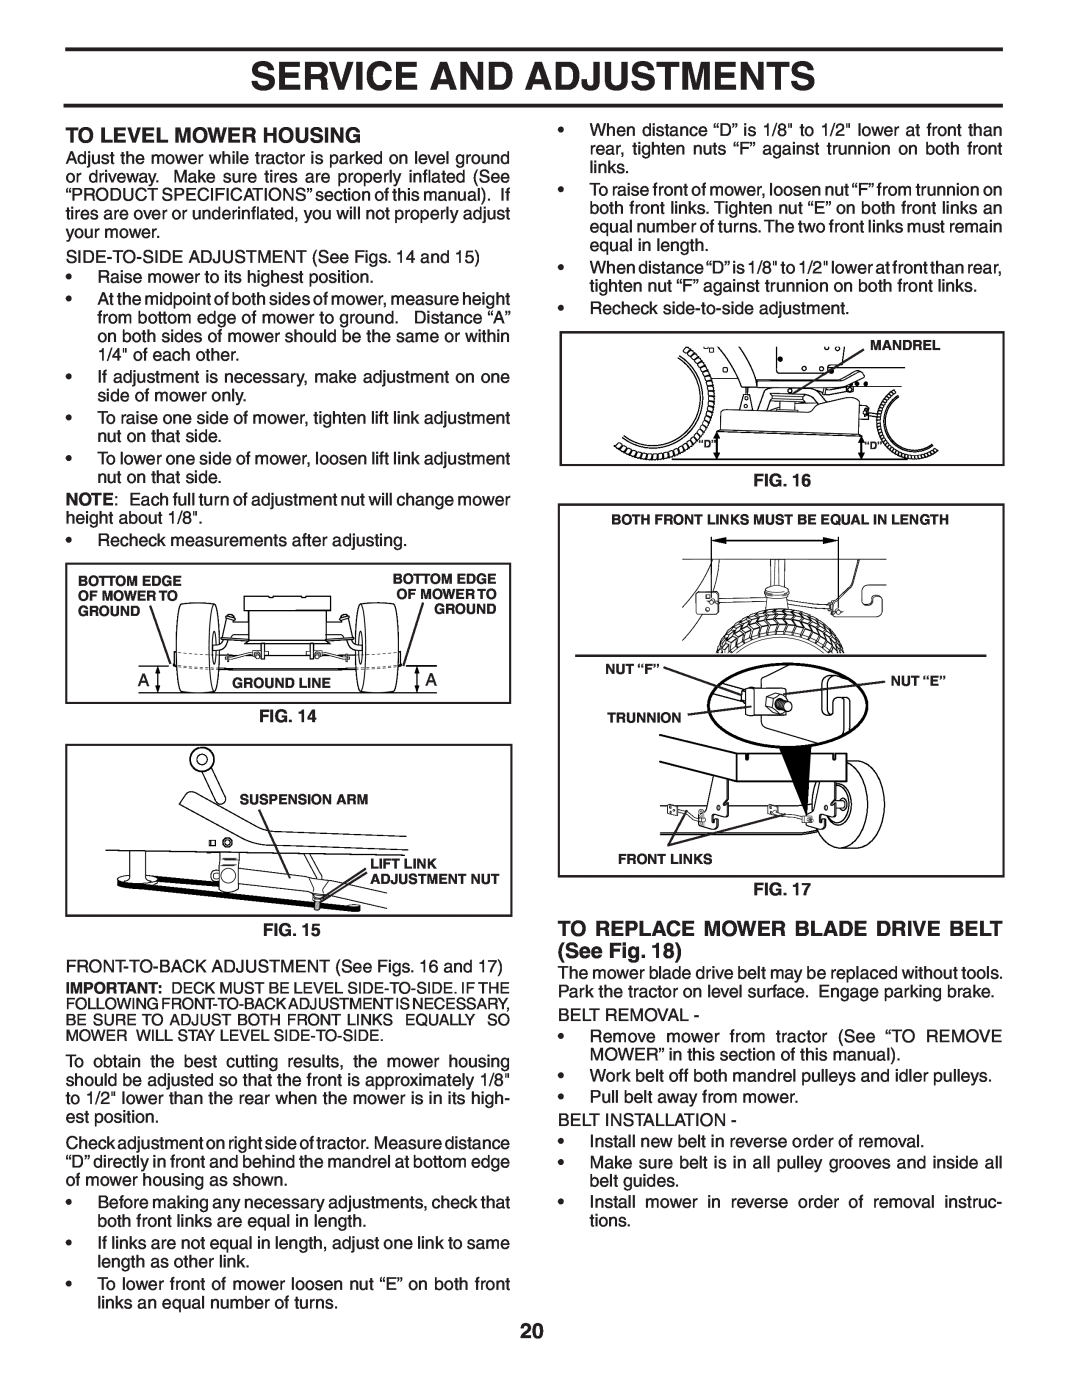 Poulan HD17542 manual To Level Mower Housing, TO REPLACE MOWER BLADE DRIVE BELT See Fig, Service And Adjustments 